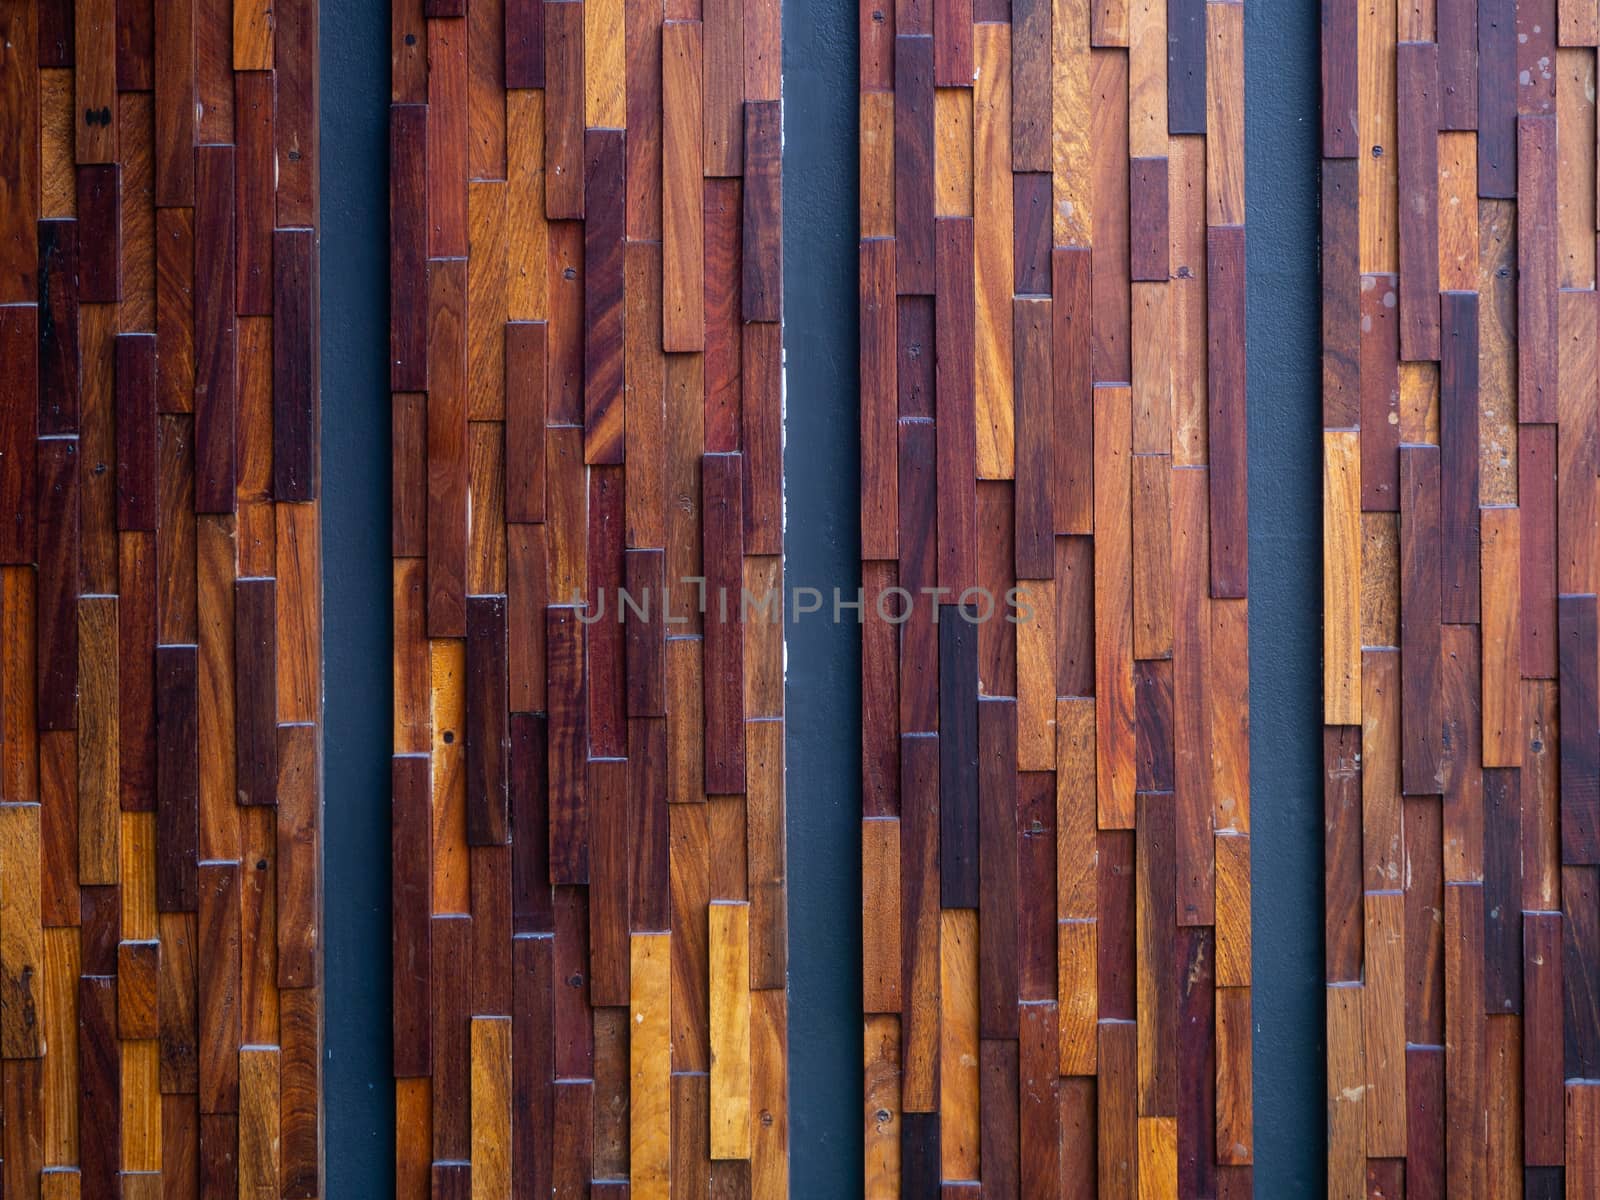 The natural interior with wood wall panels - Image by shutterbird